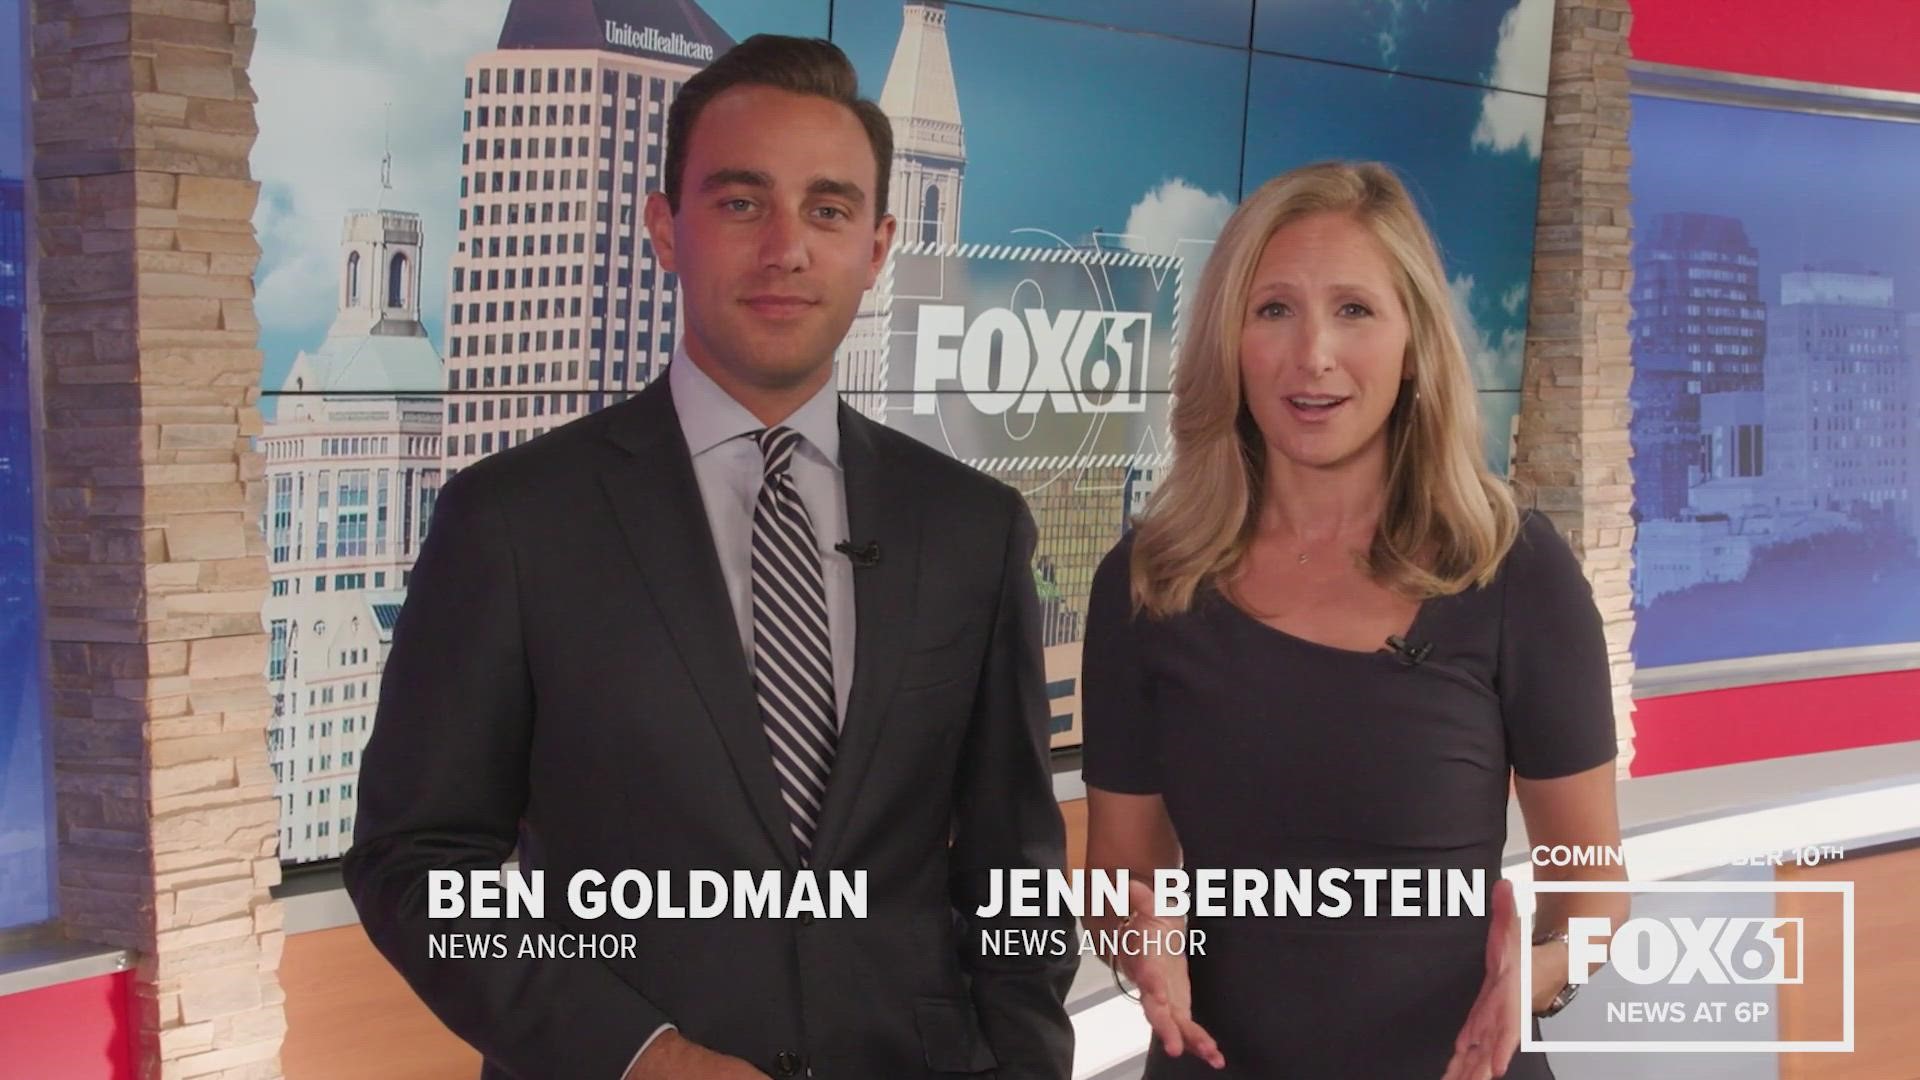 The new one-hour newscast – FOX61 News at 6PM – will be anchored by Jenn Bernstein, Ben Goldman and chief meteorologist Rachel Frank.